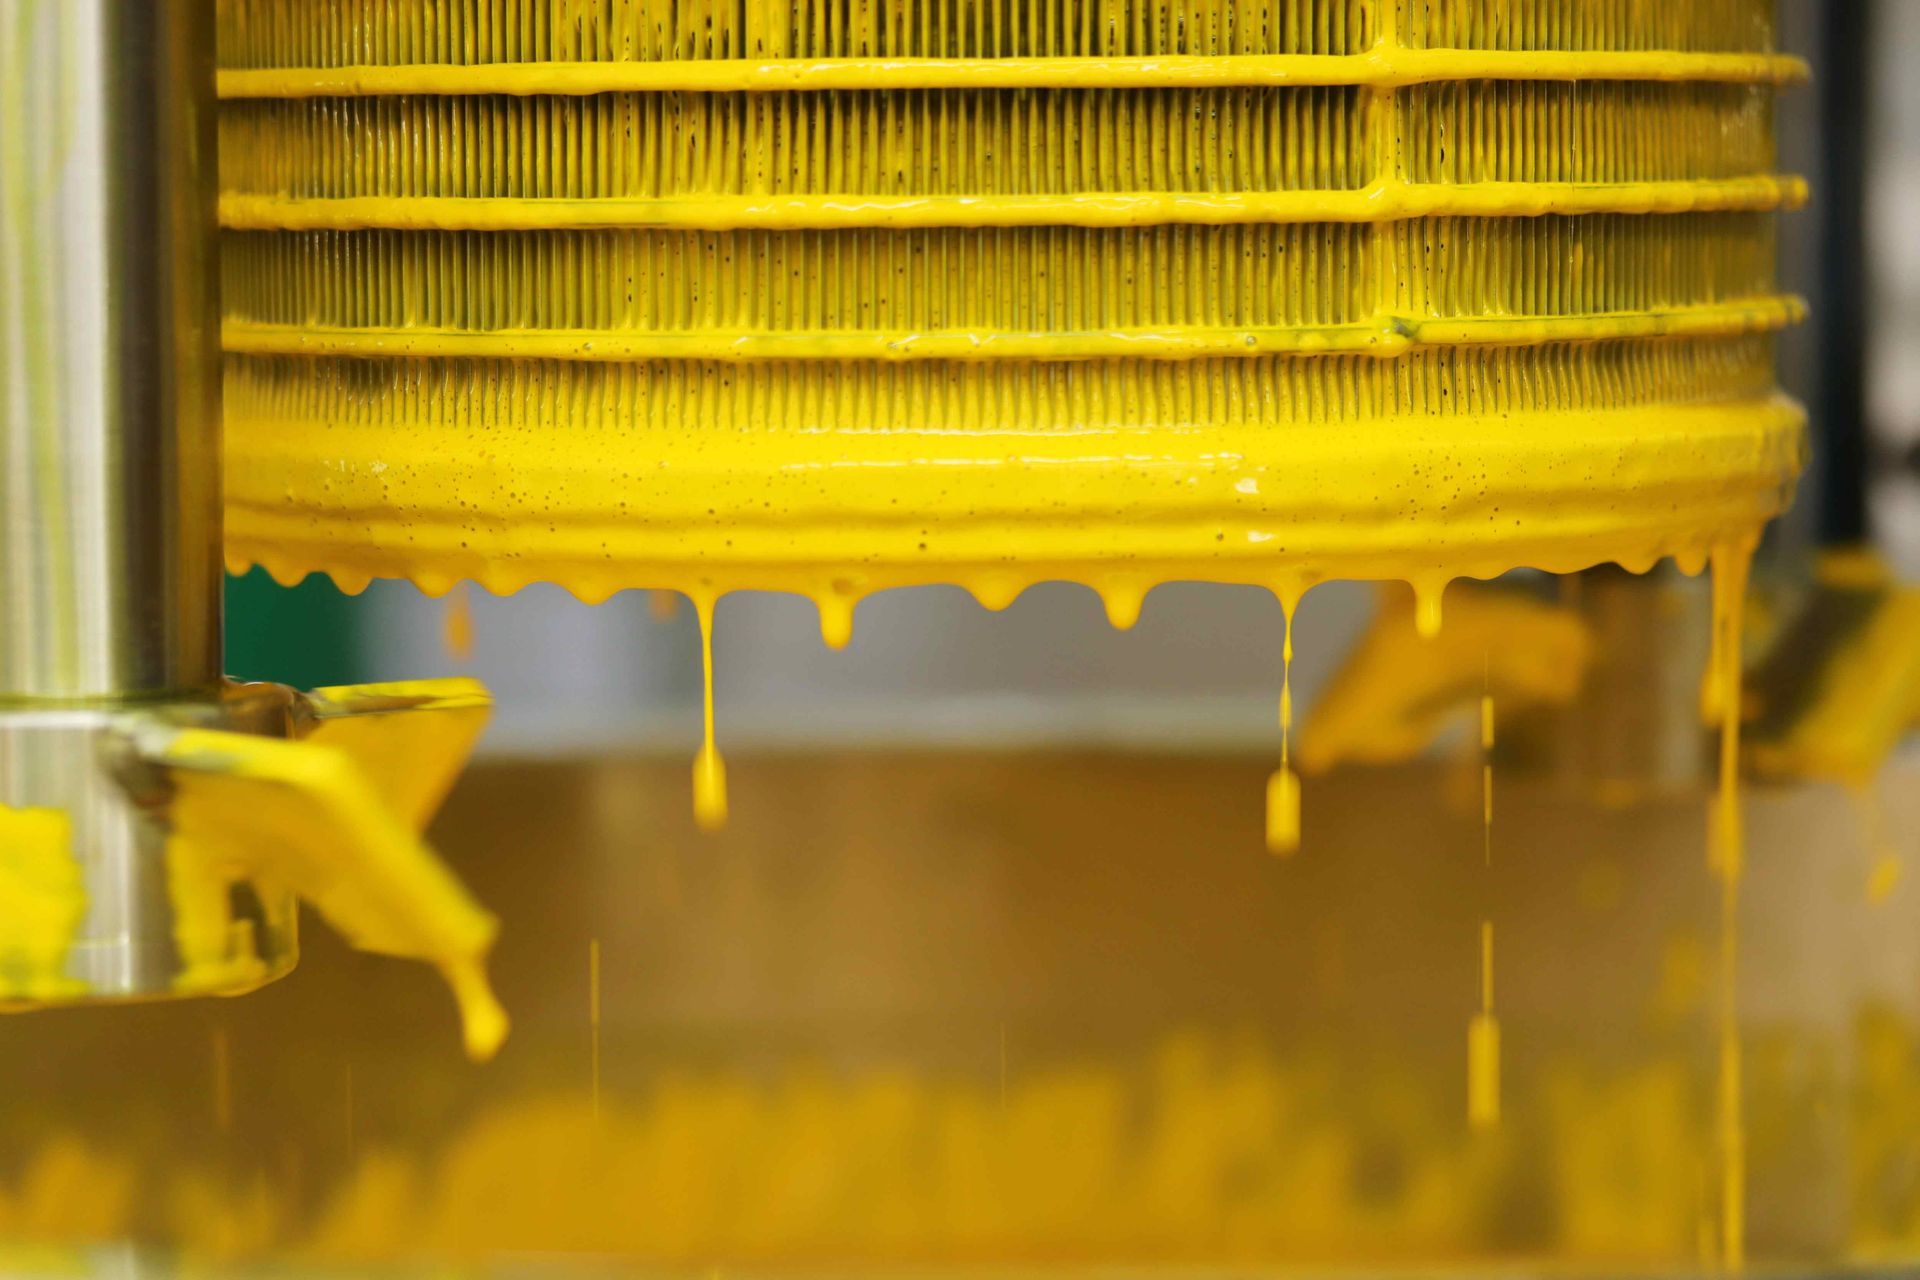 Commercial paint factory portrait of dripping yellow paint used for advertising